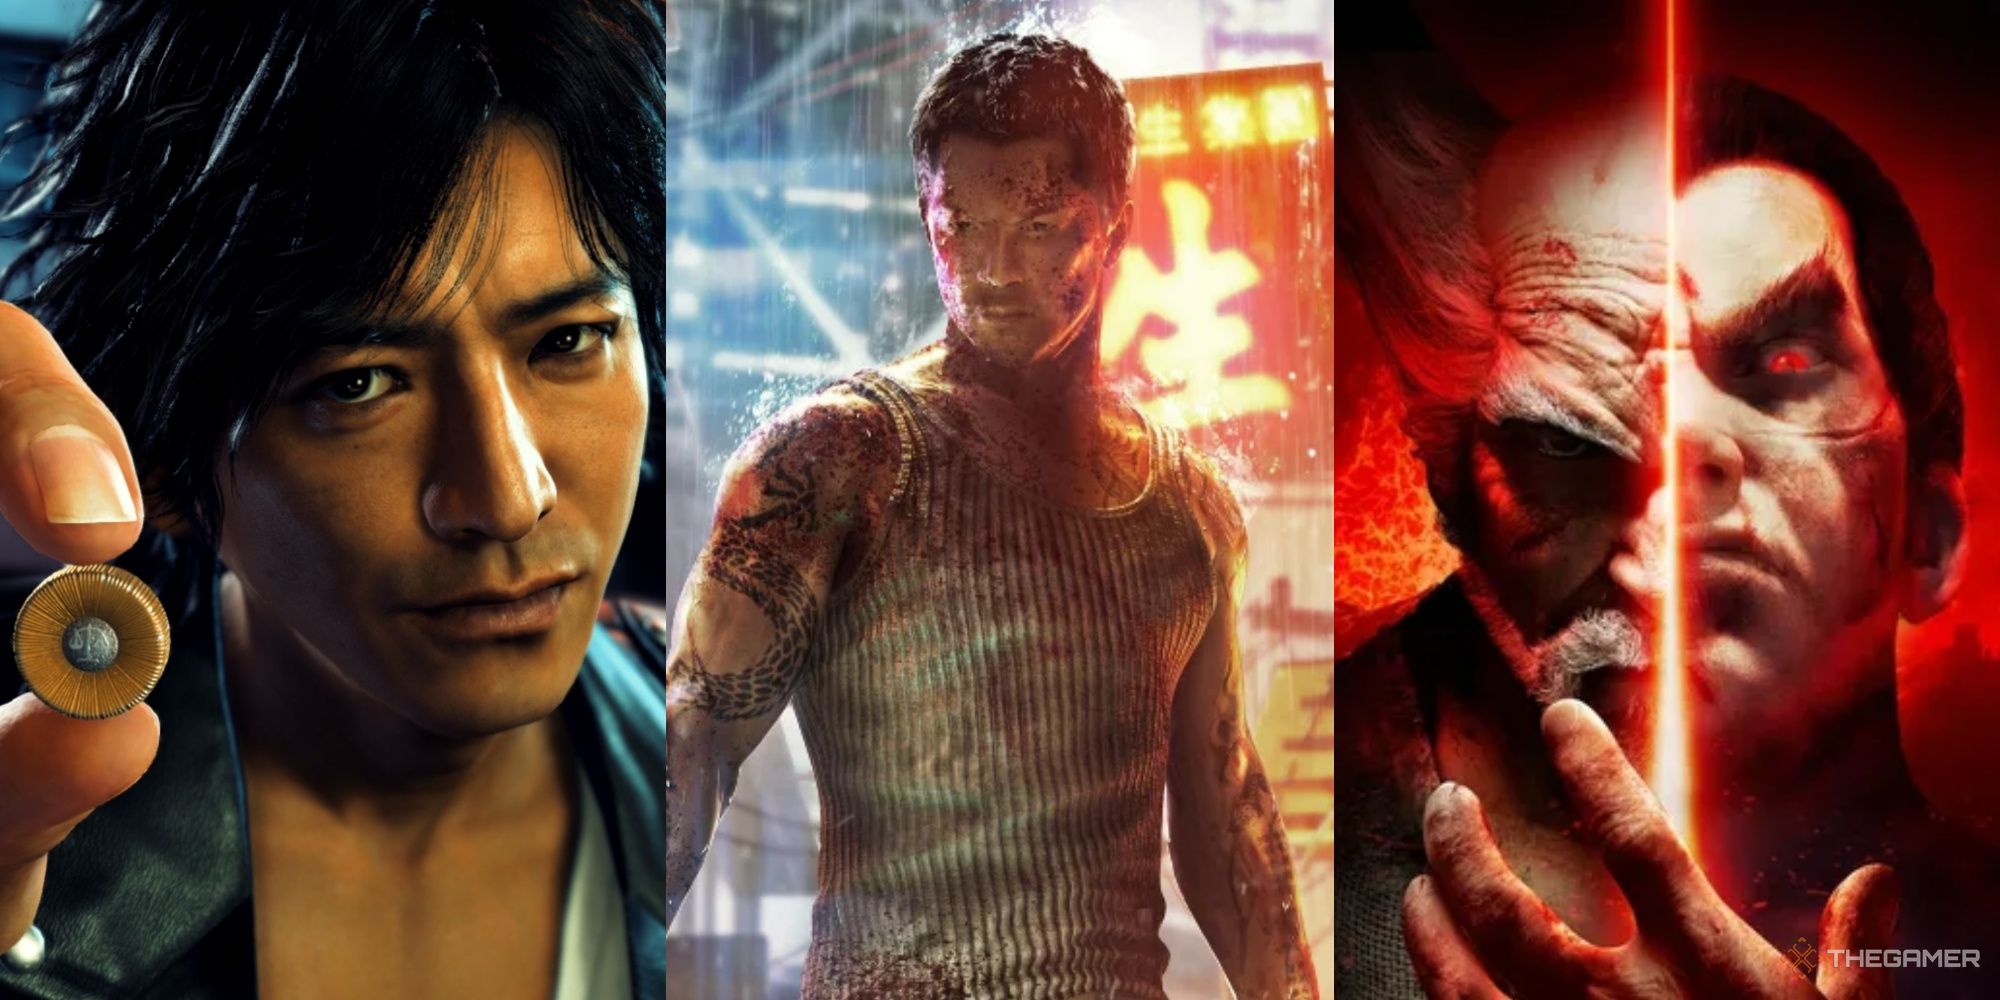 Judgment, Sleeping Dogs, and Tekken 7 for Games To Play If You Like Sifu